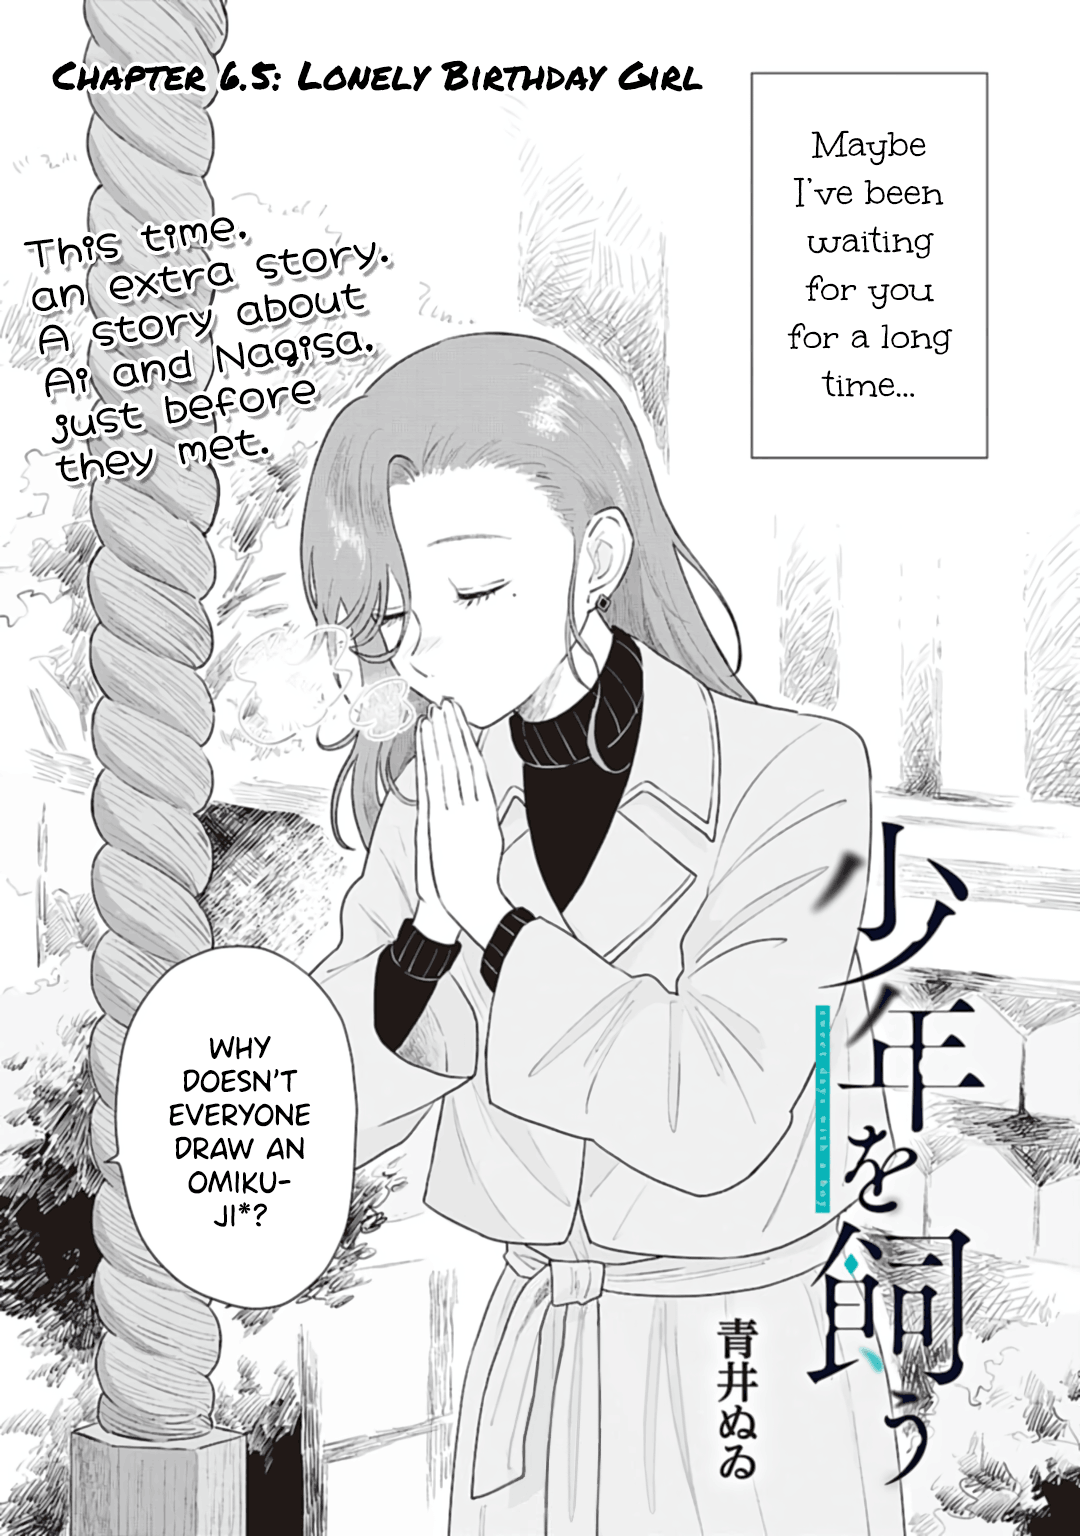 Shounen Wo Kau Vol.2 Chapter 6.5: Lonely Birthday Girl - Picture 1